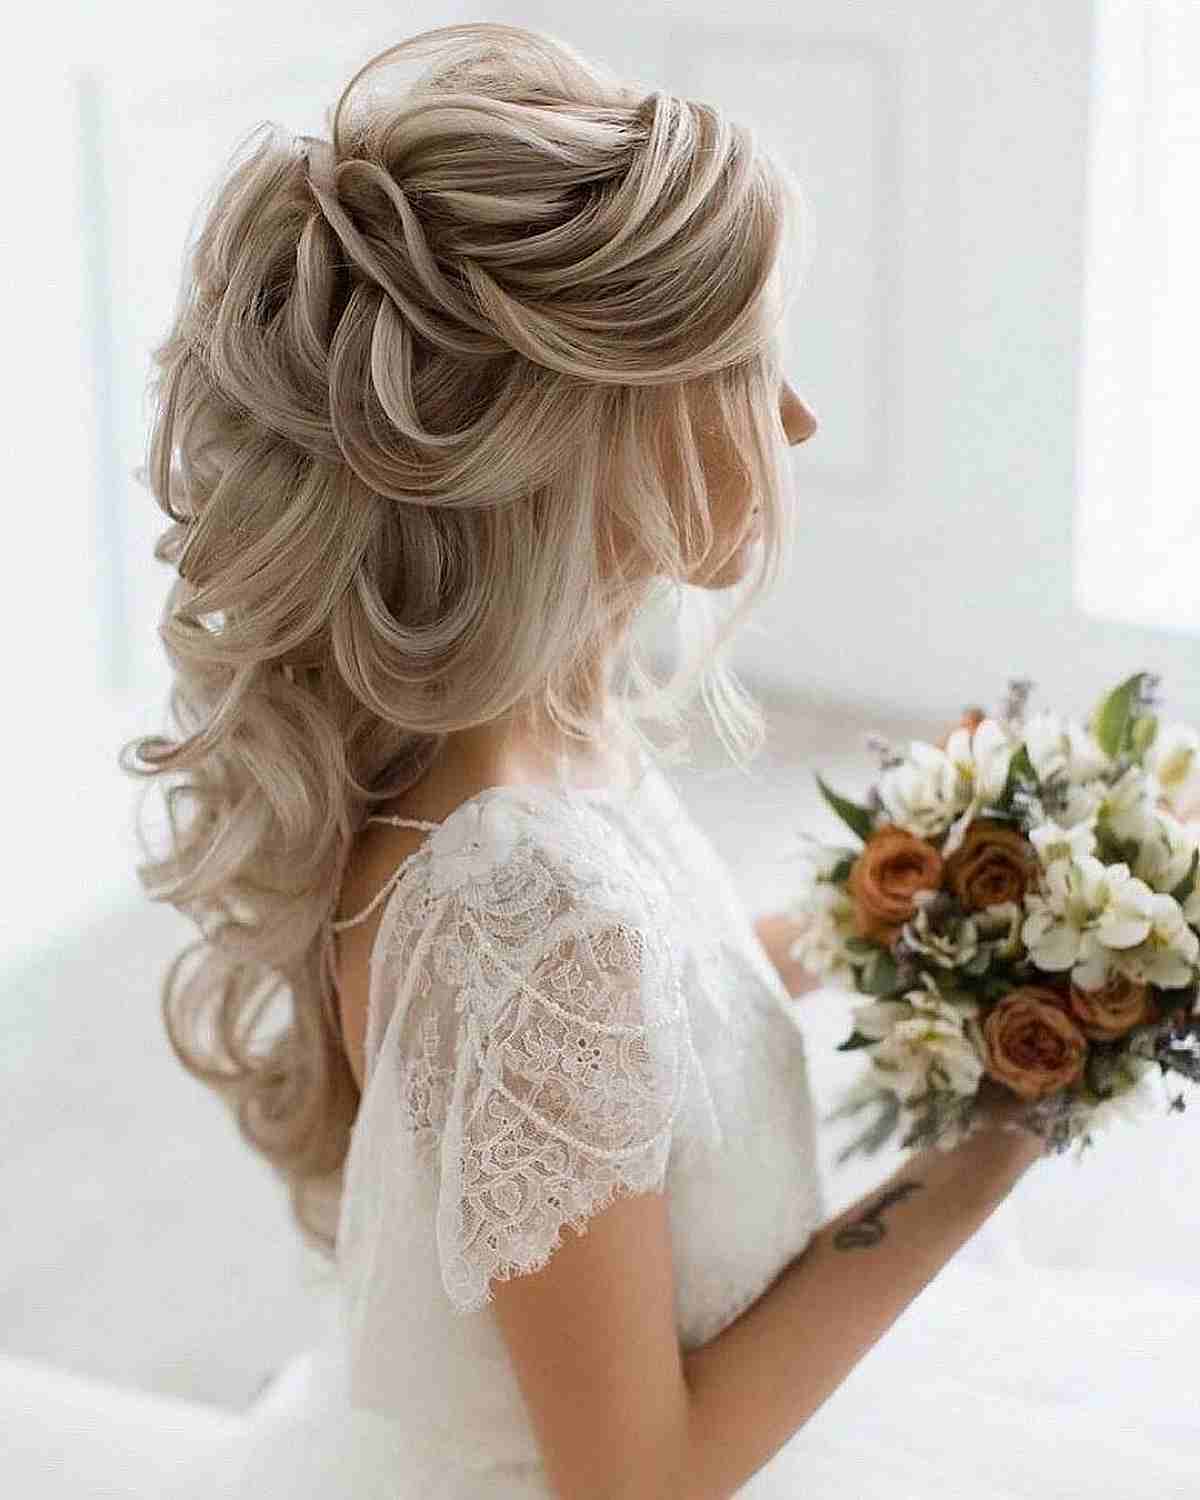 How to Master the Half Up Hairstyle for Your Wedding